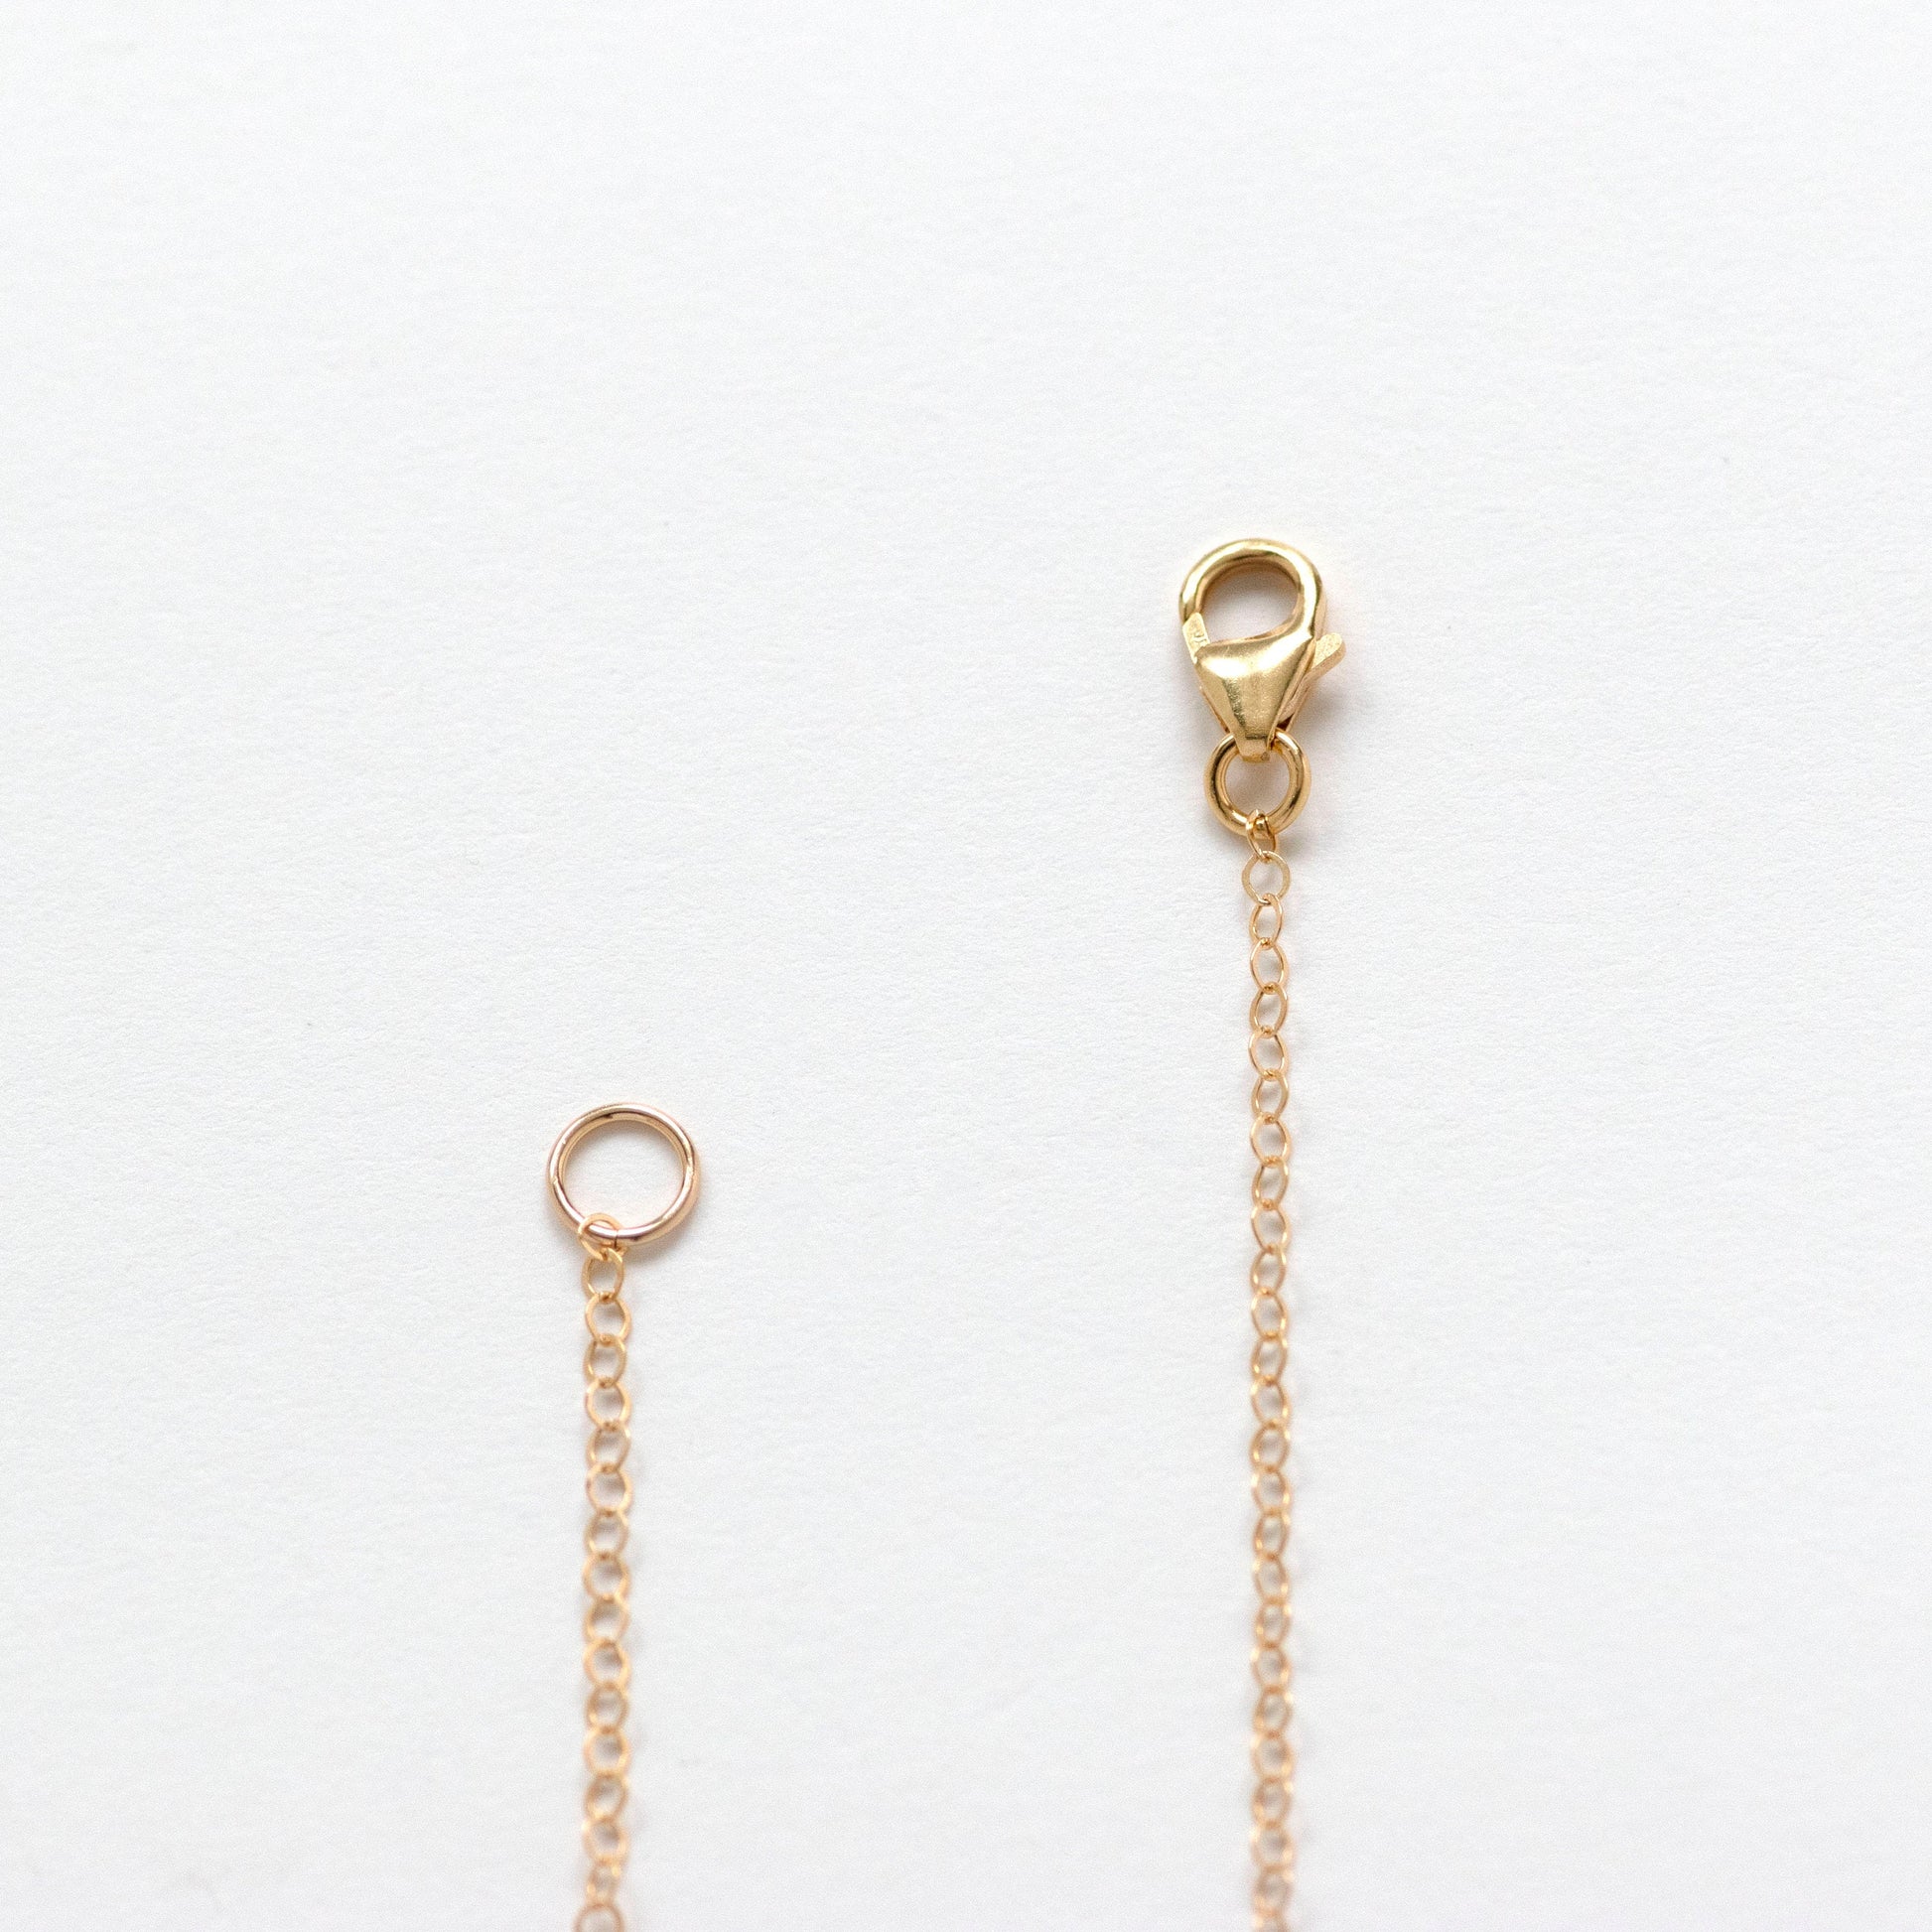 14k gold filled chain and lobster clasp